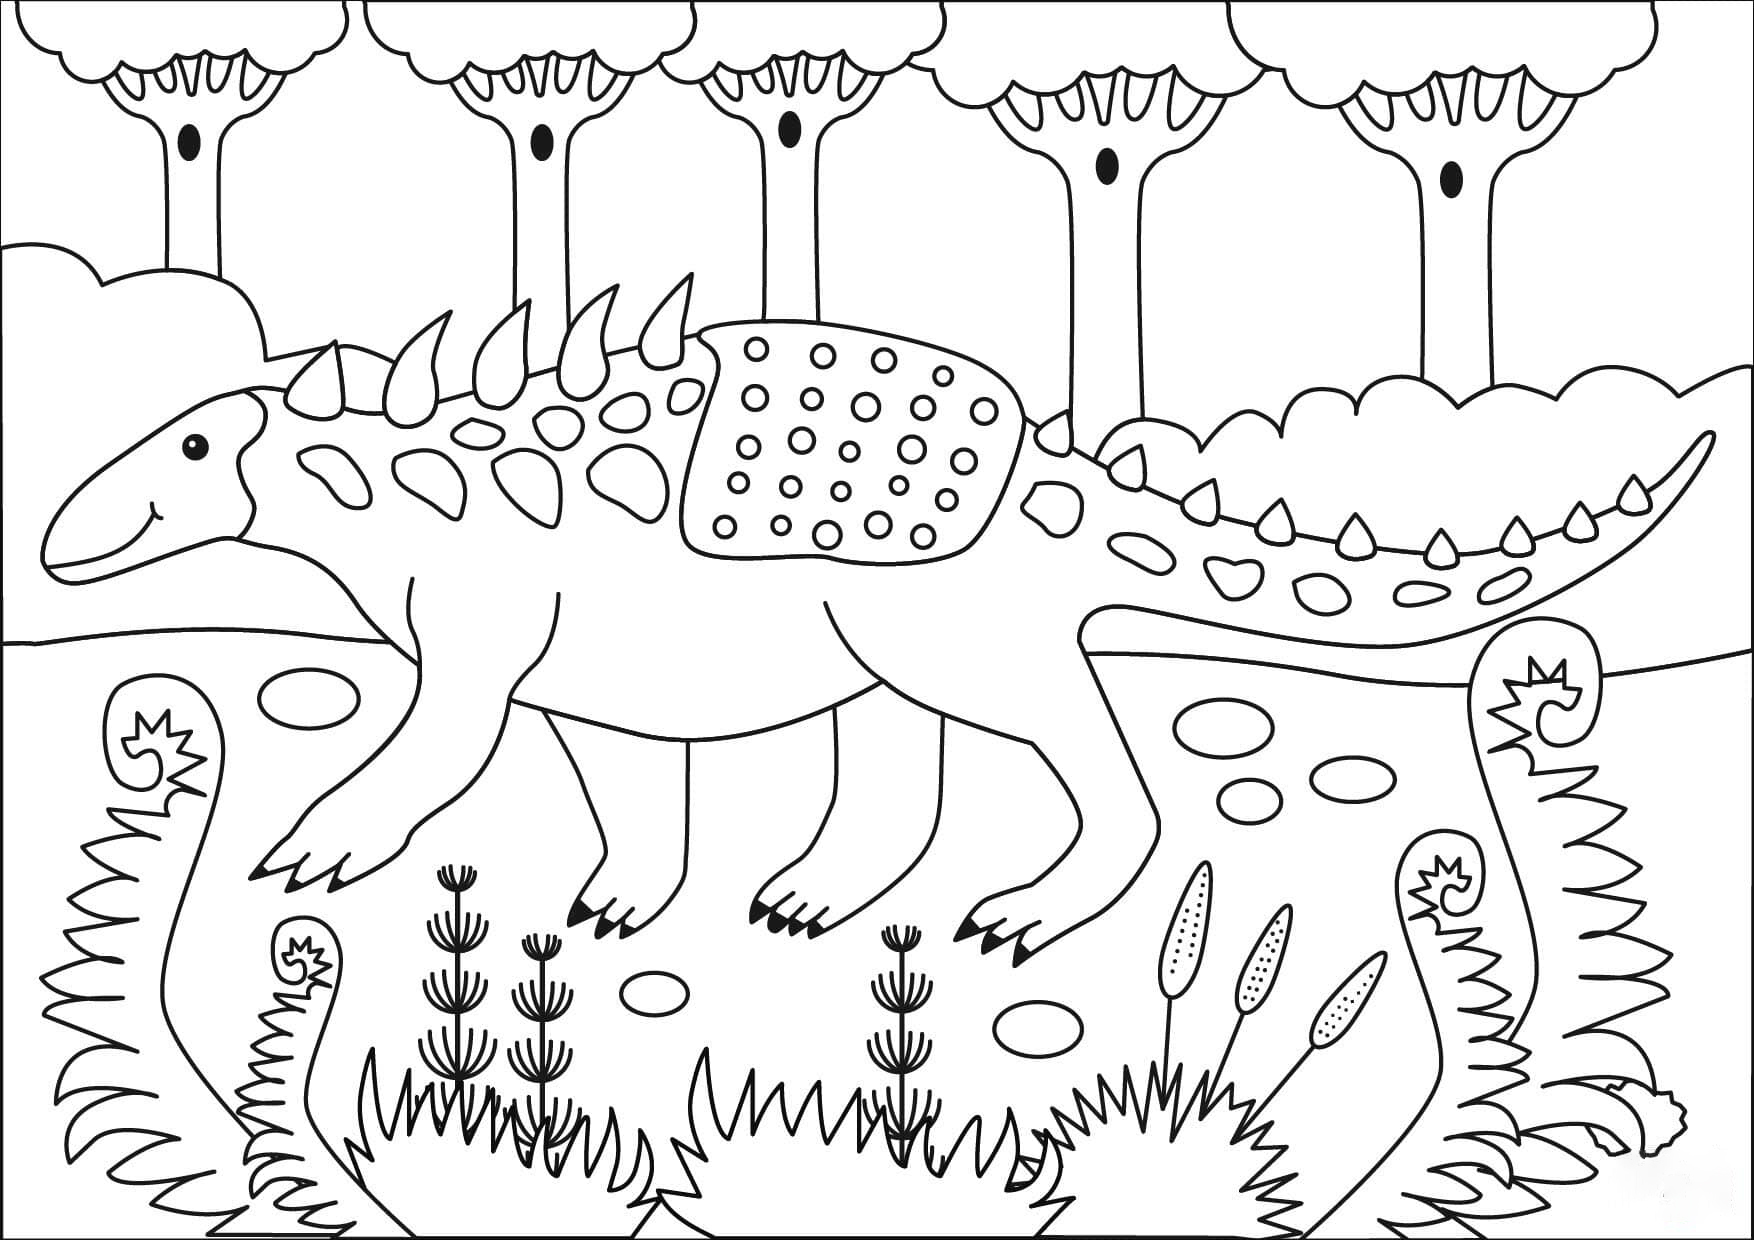 Polacanthus is a shy species that prefers to live alone Coloring Pages